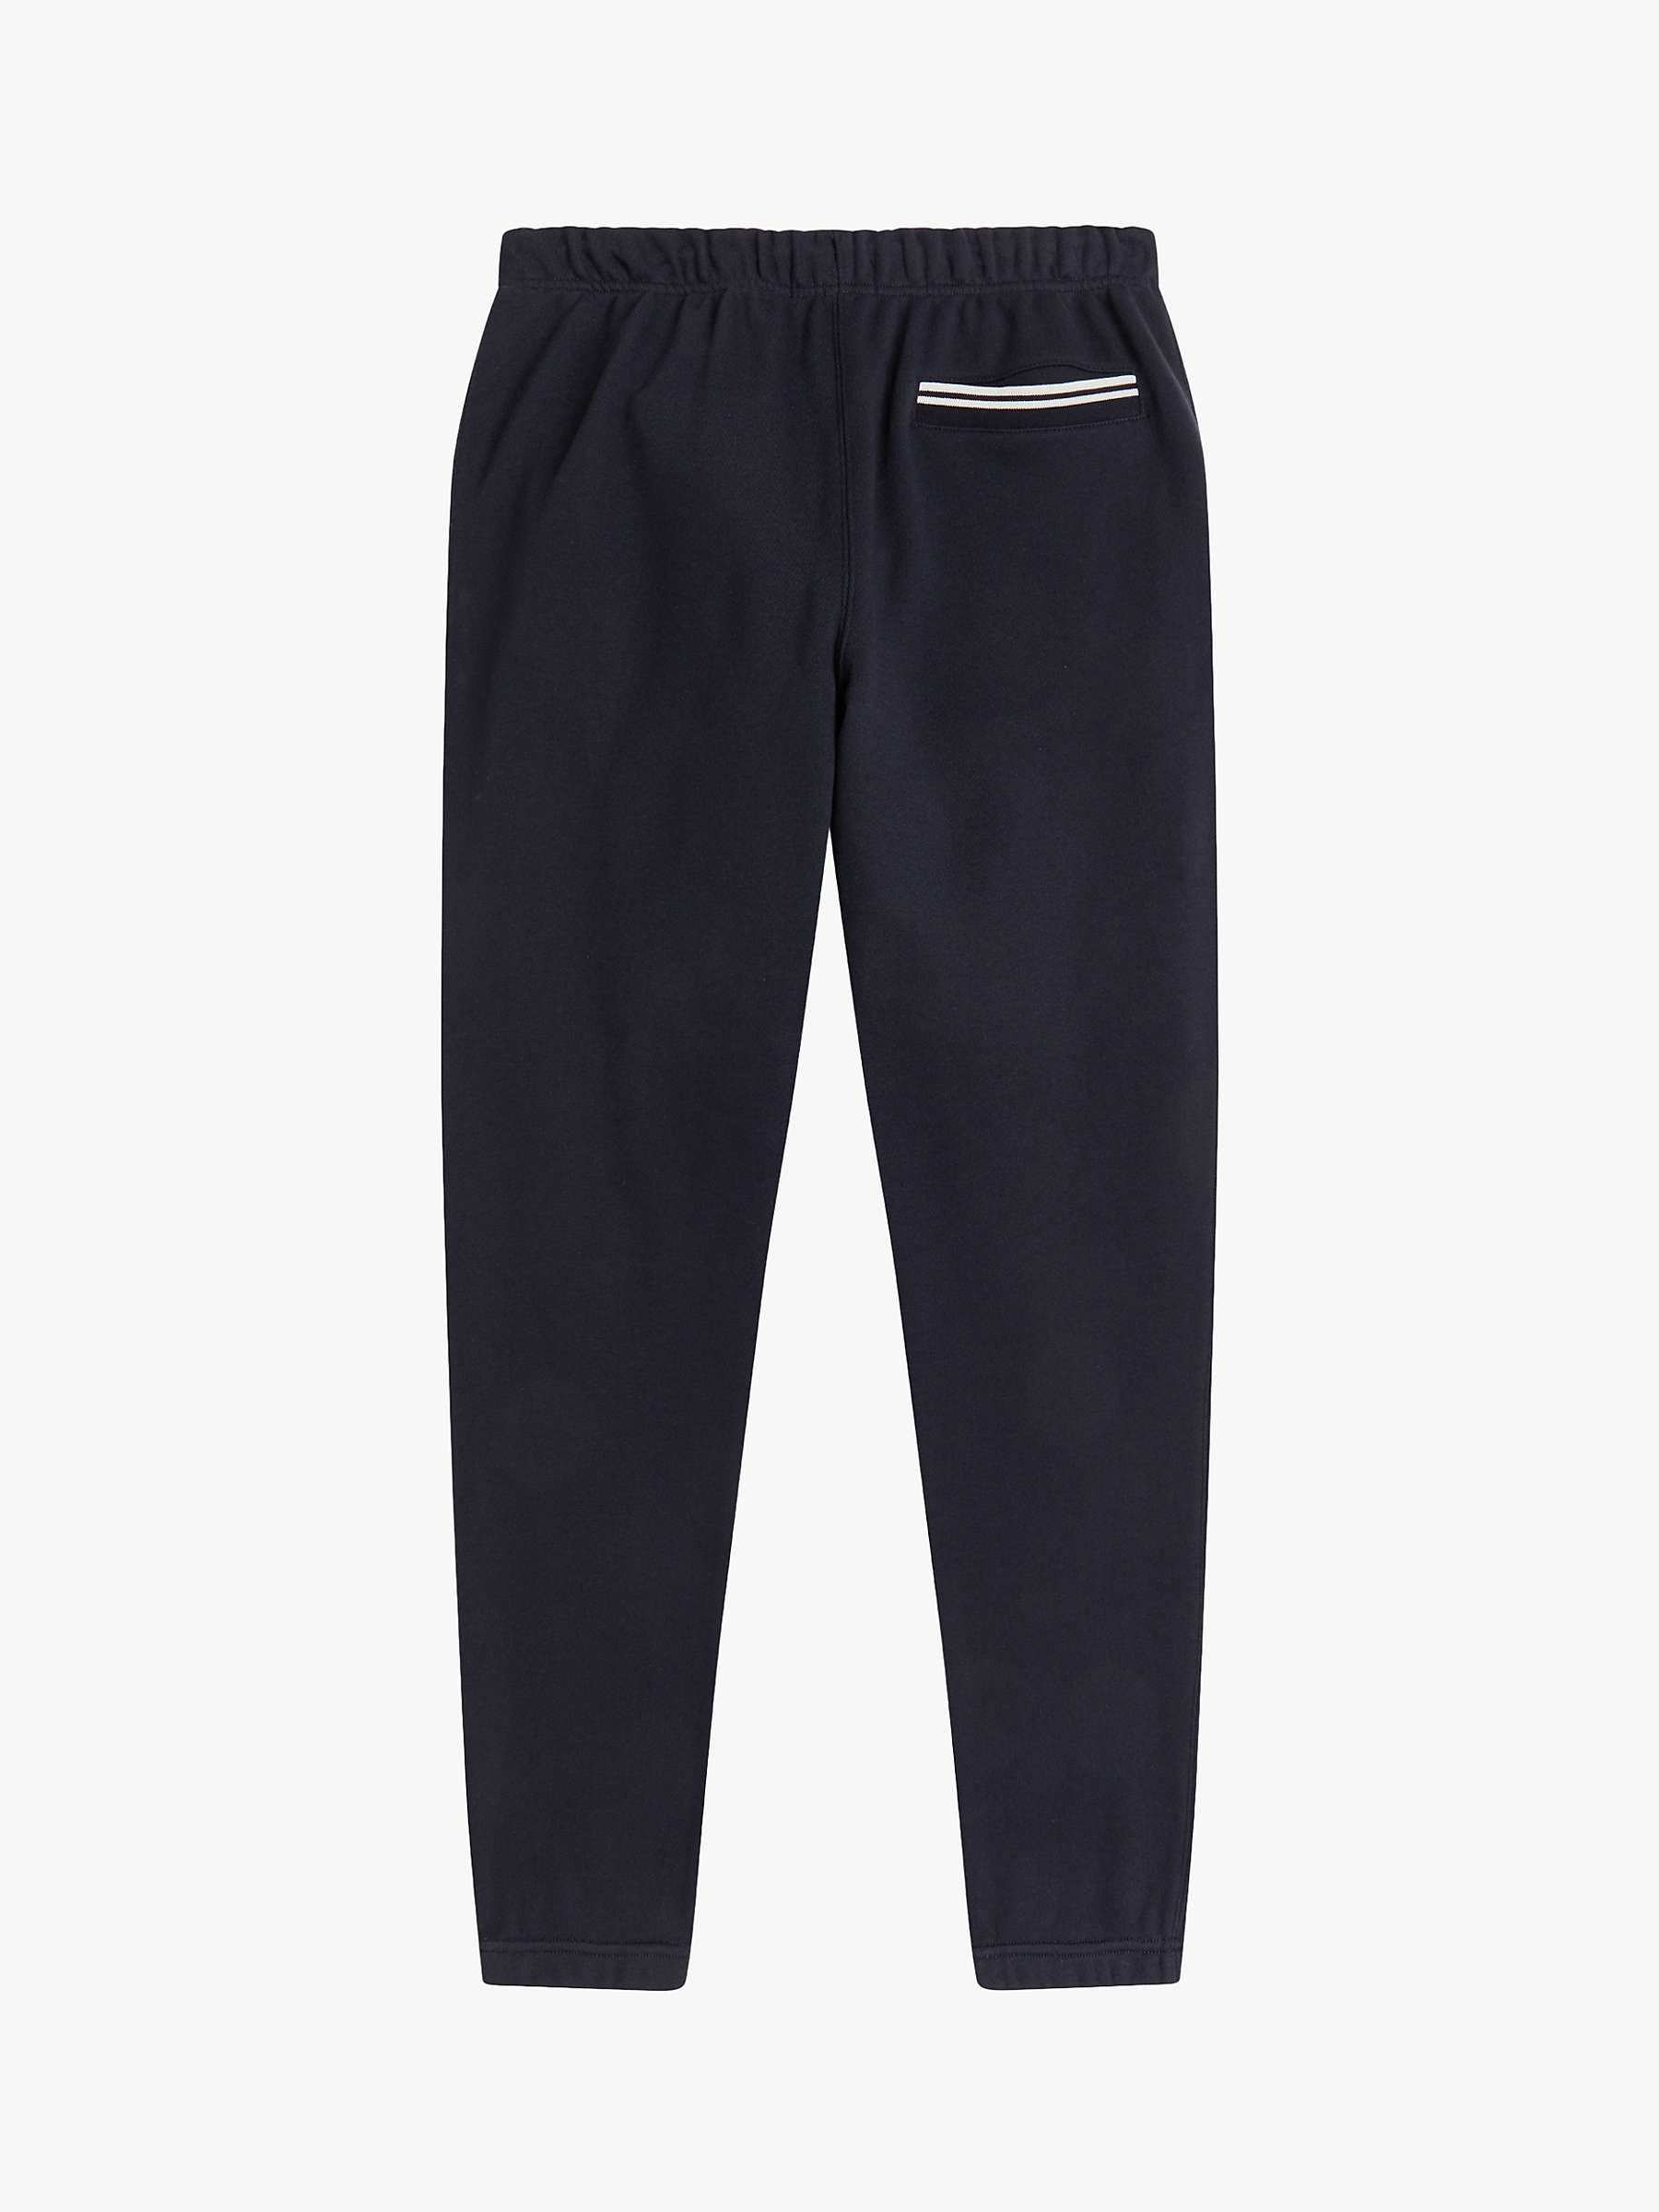 Buy Fred Perry Cotton Blend Sweatpants Online at johnlewis.com